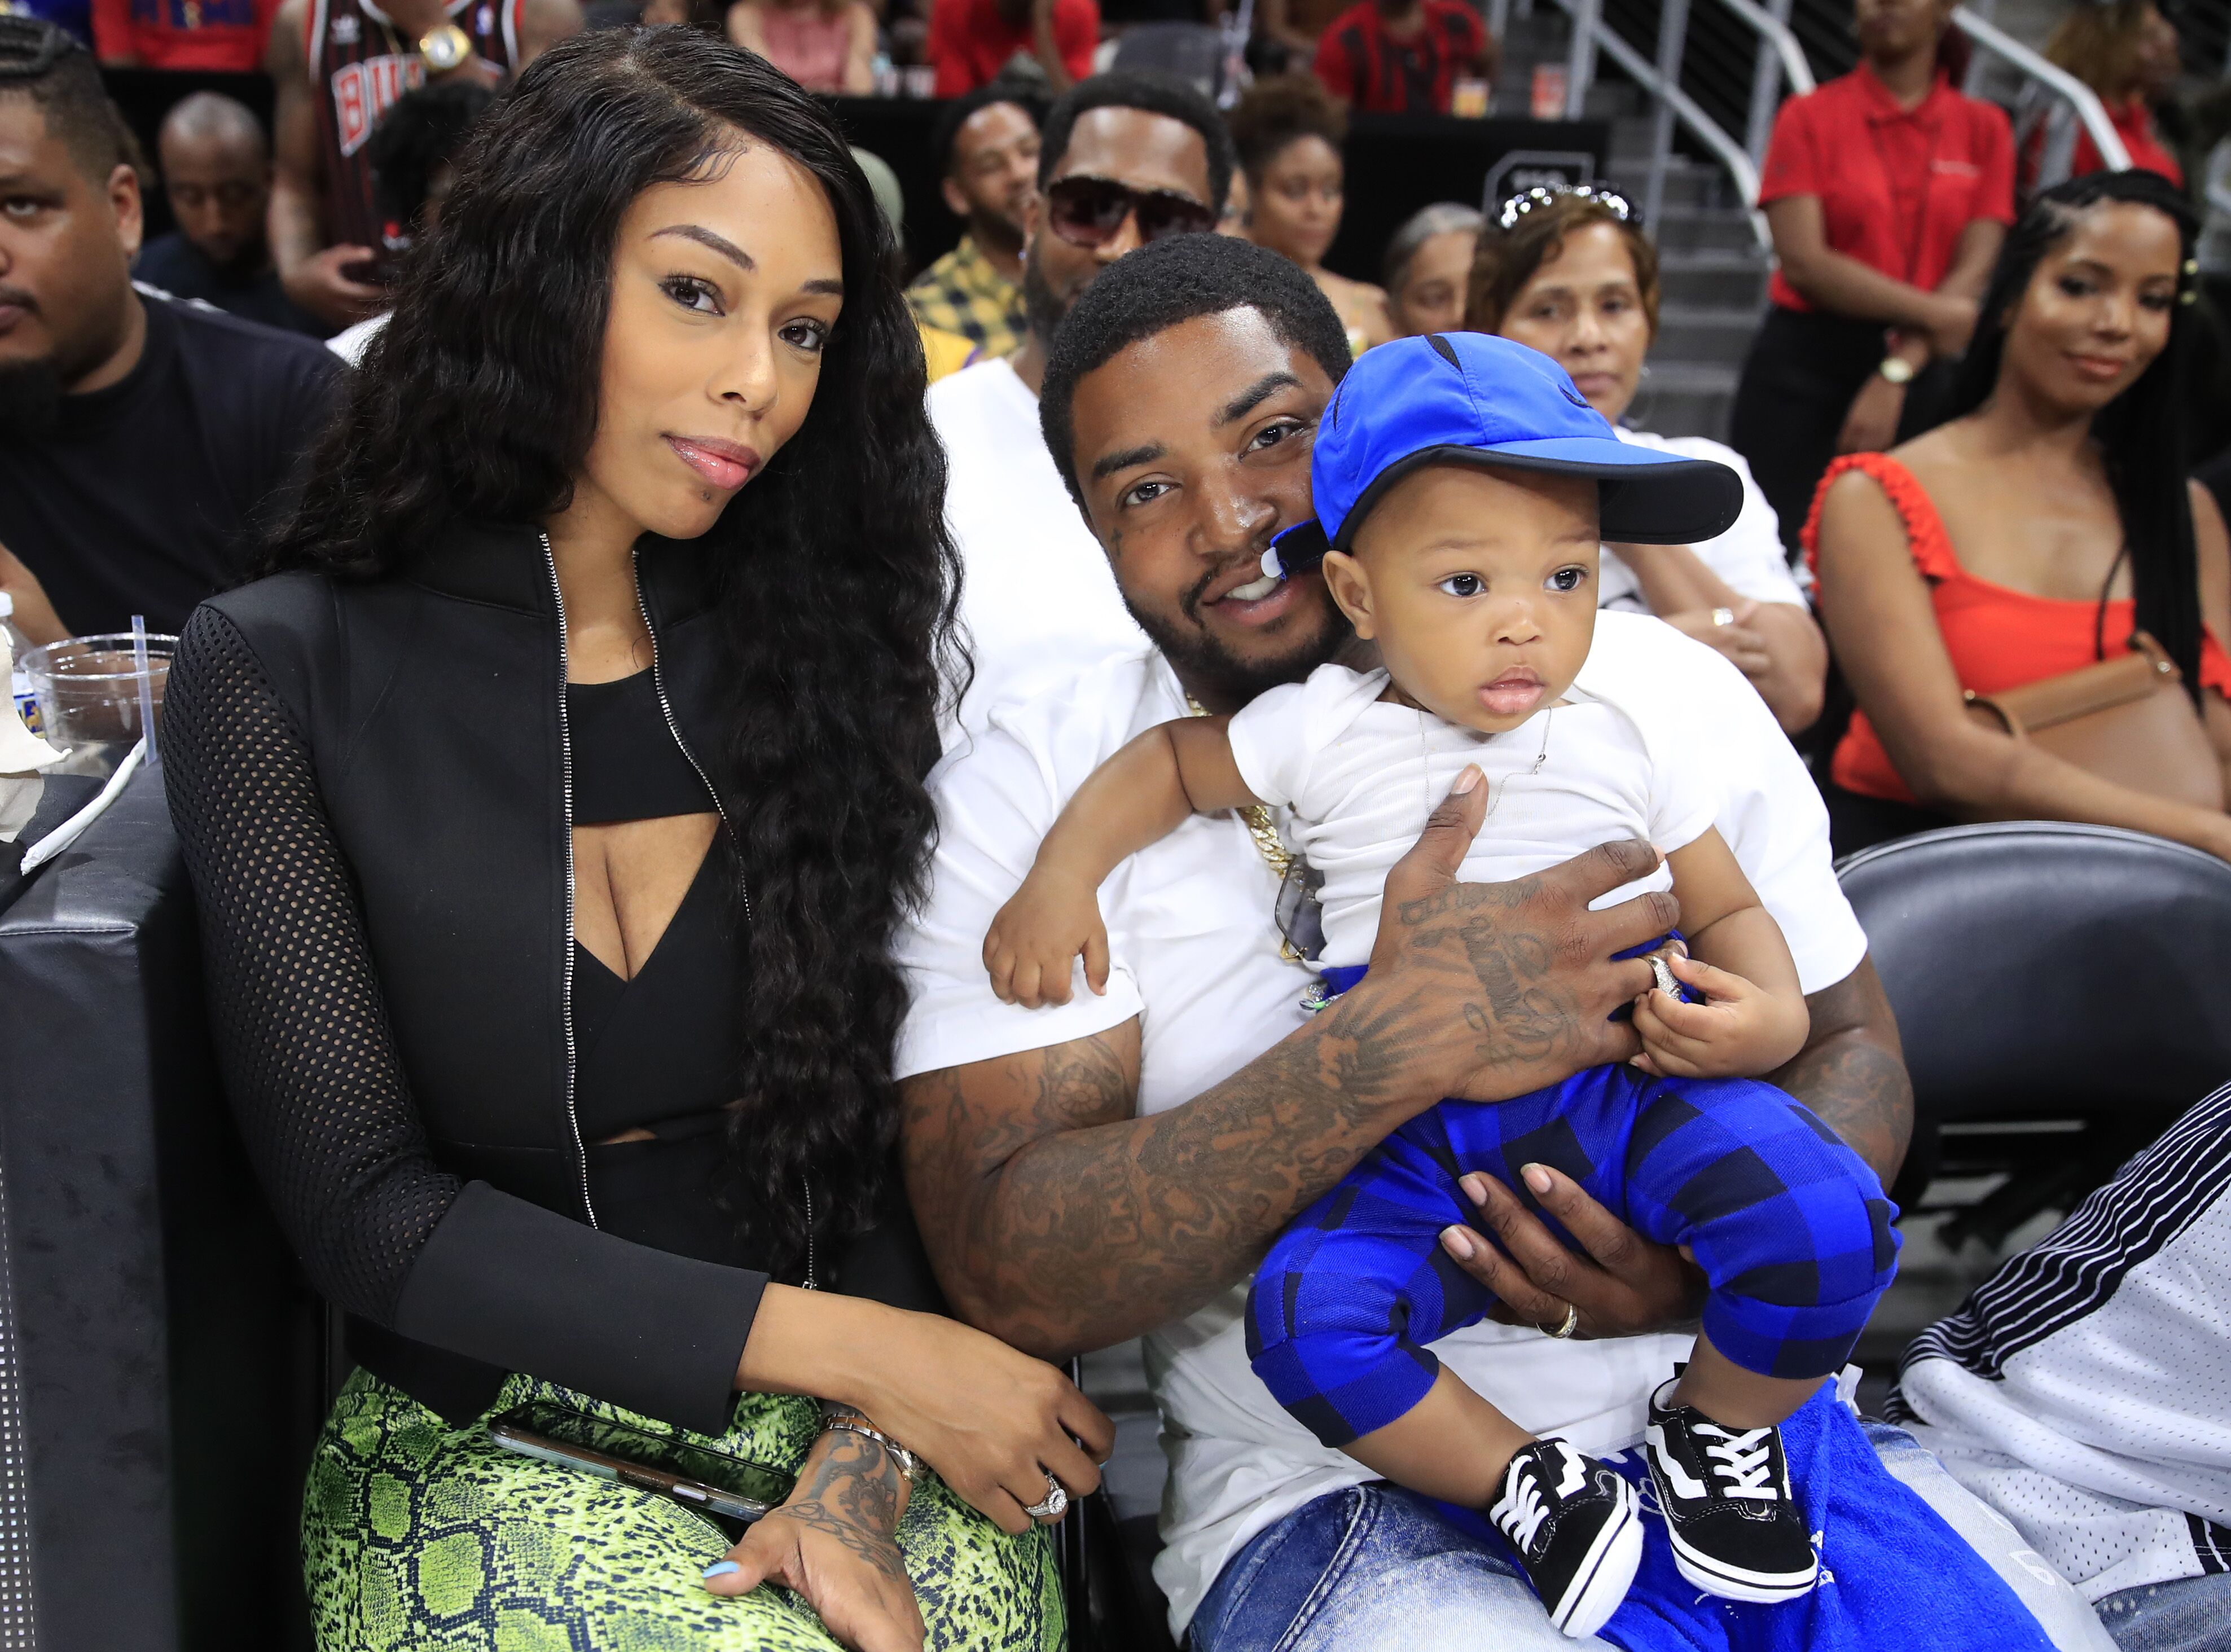 Lil Scrappy and Bambi Benson attend an NBA game with their son Prince Breland | Photo: Getty Images